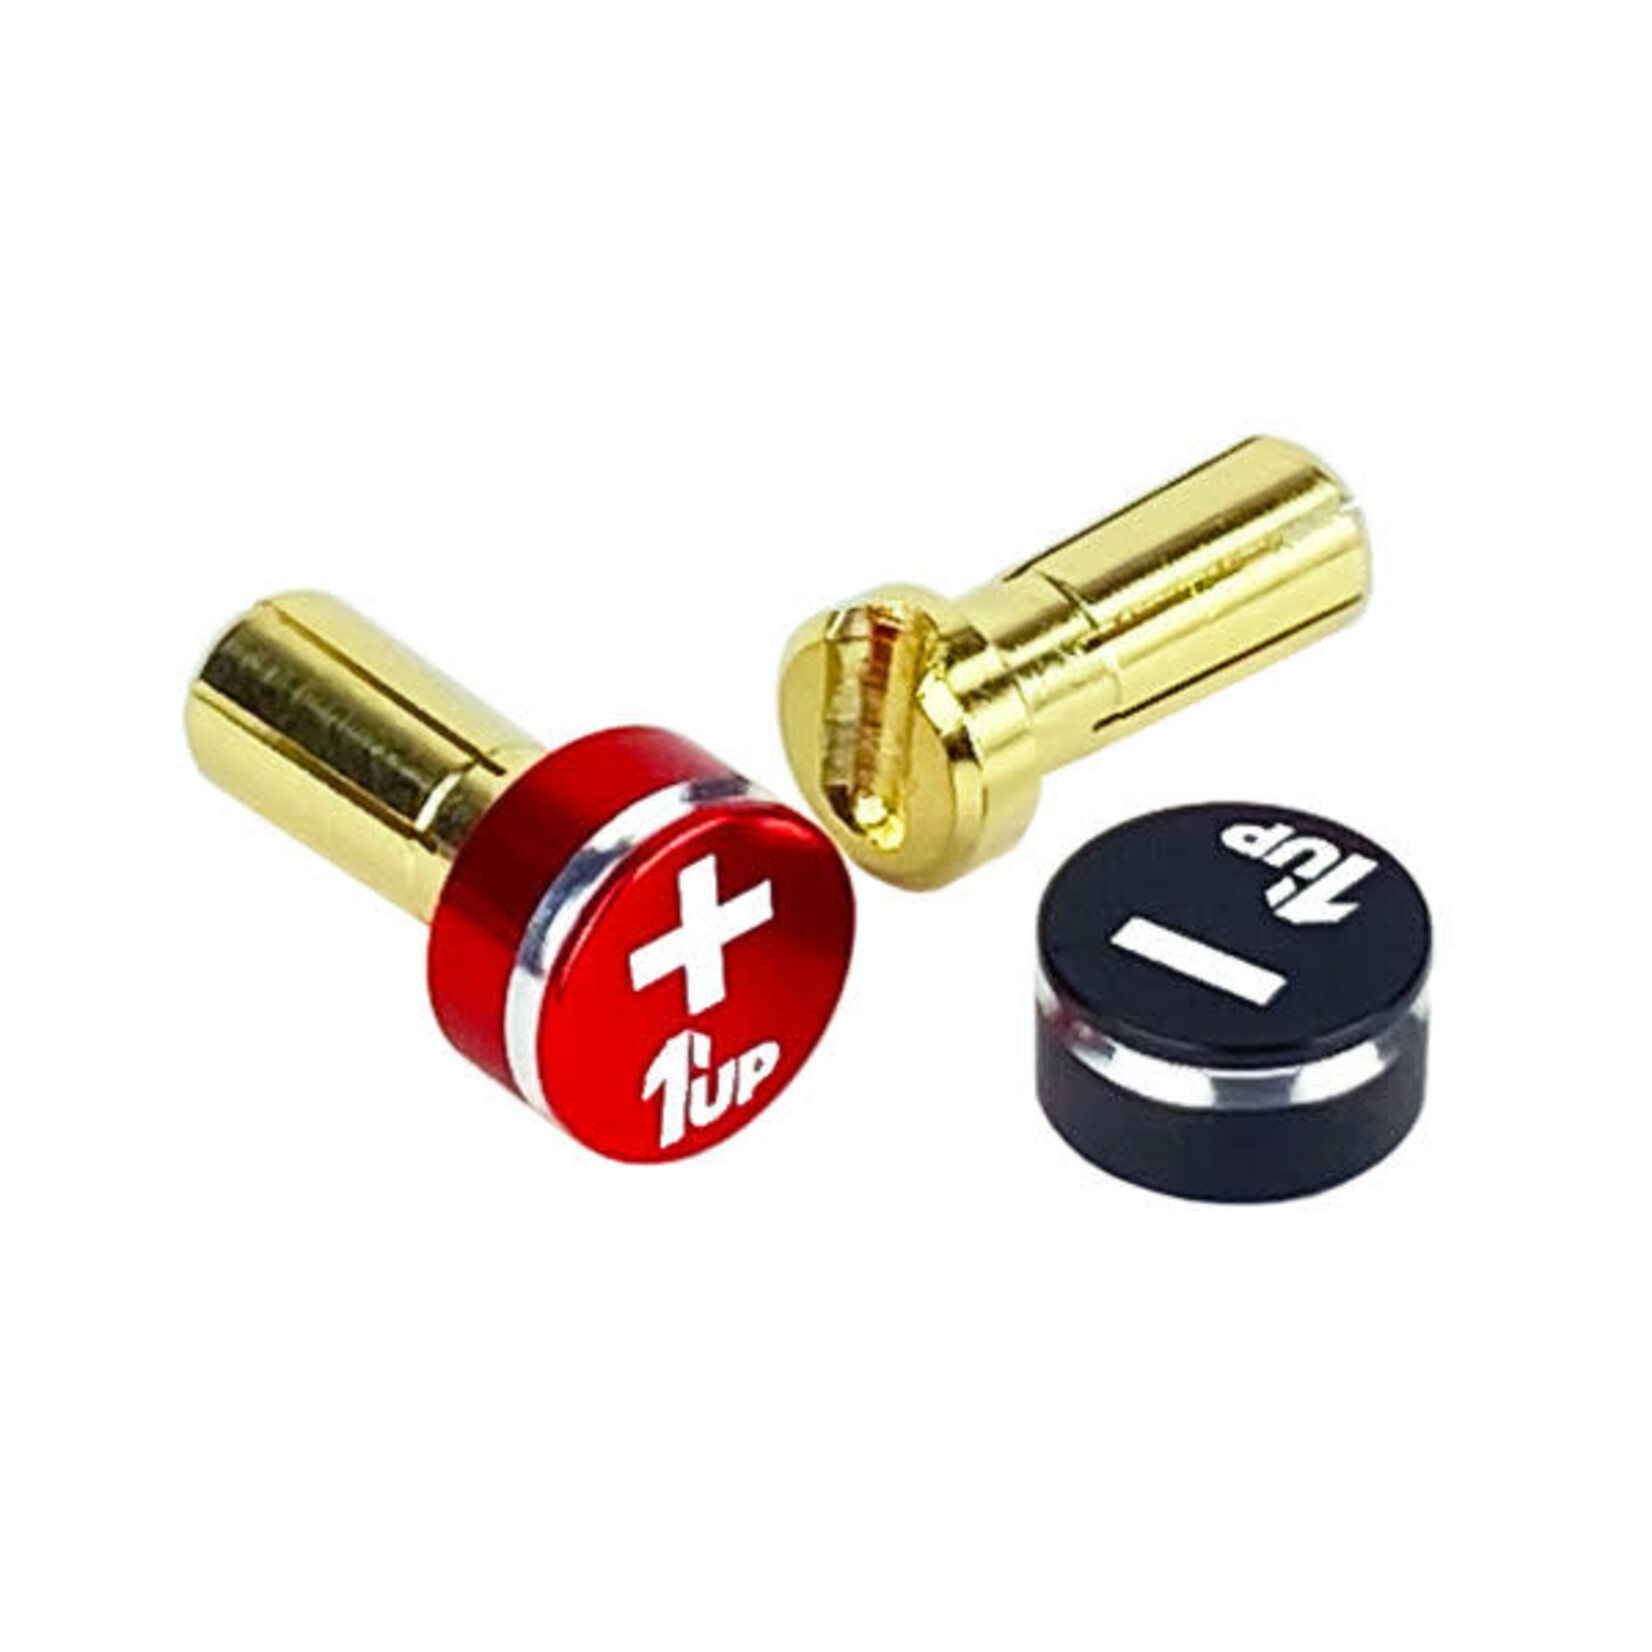 1UP 1UP190432 1Up Racing LowPro Bullet Plugs & Grips - 5mm - Black/Red